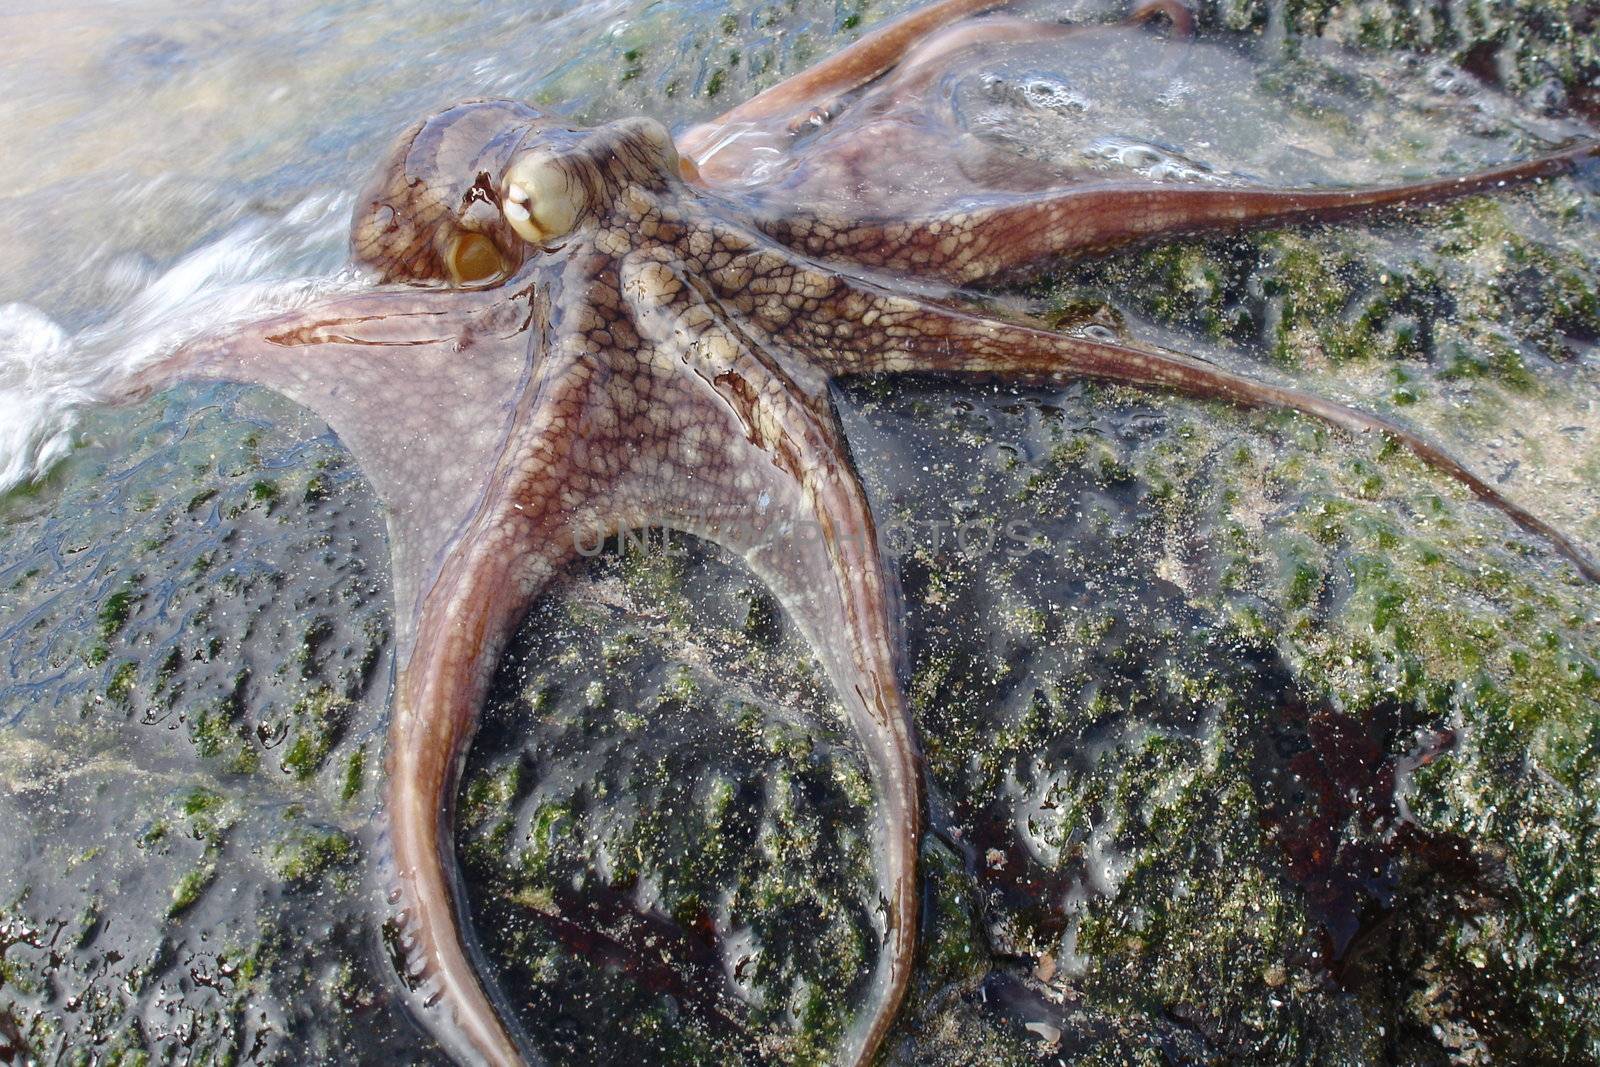 An Octopus, spread on a rock, resting.